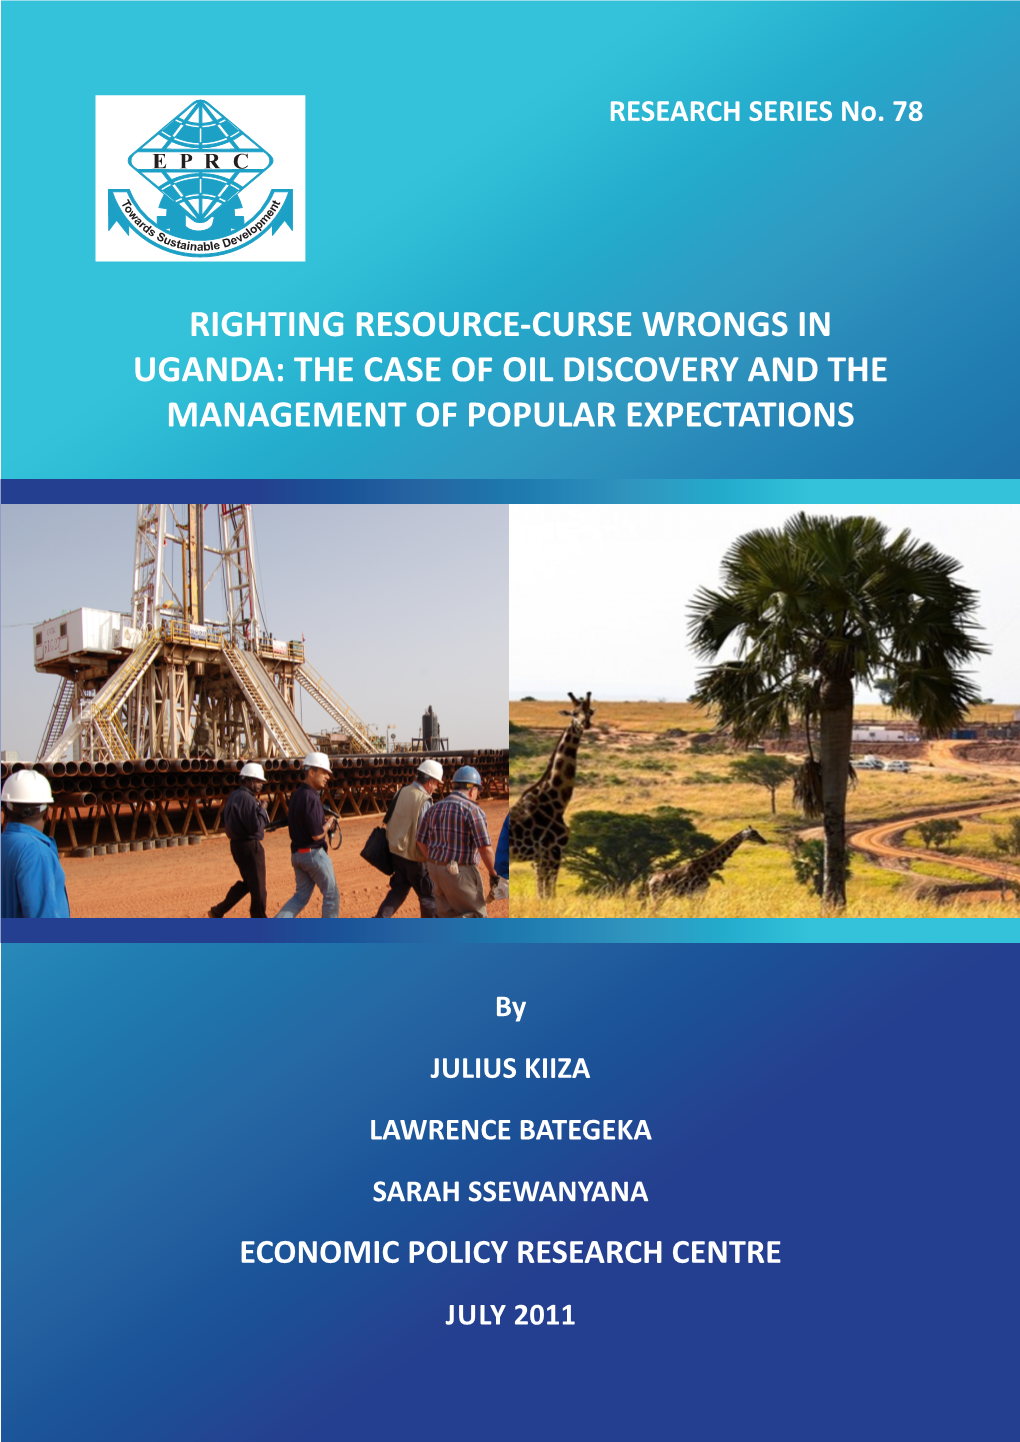 Righting Resource-Curse Wrongs in Uganda: the Case of Oil Discovery and the Management of Popular Expectations